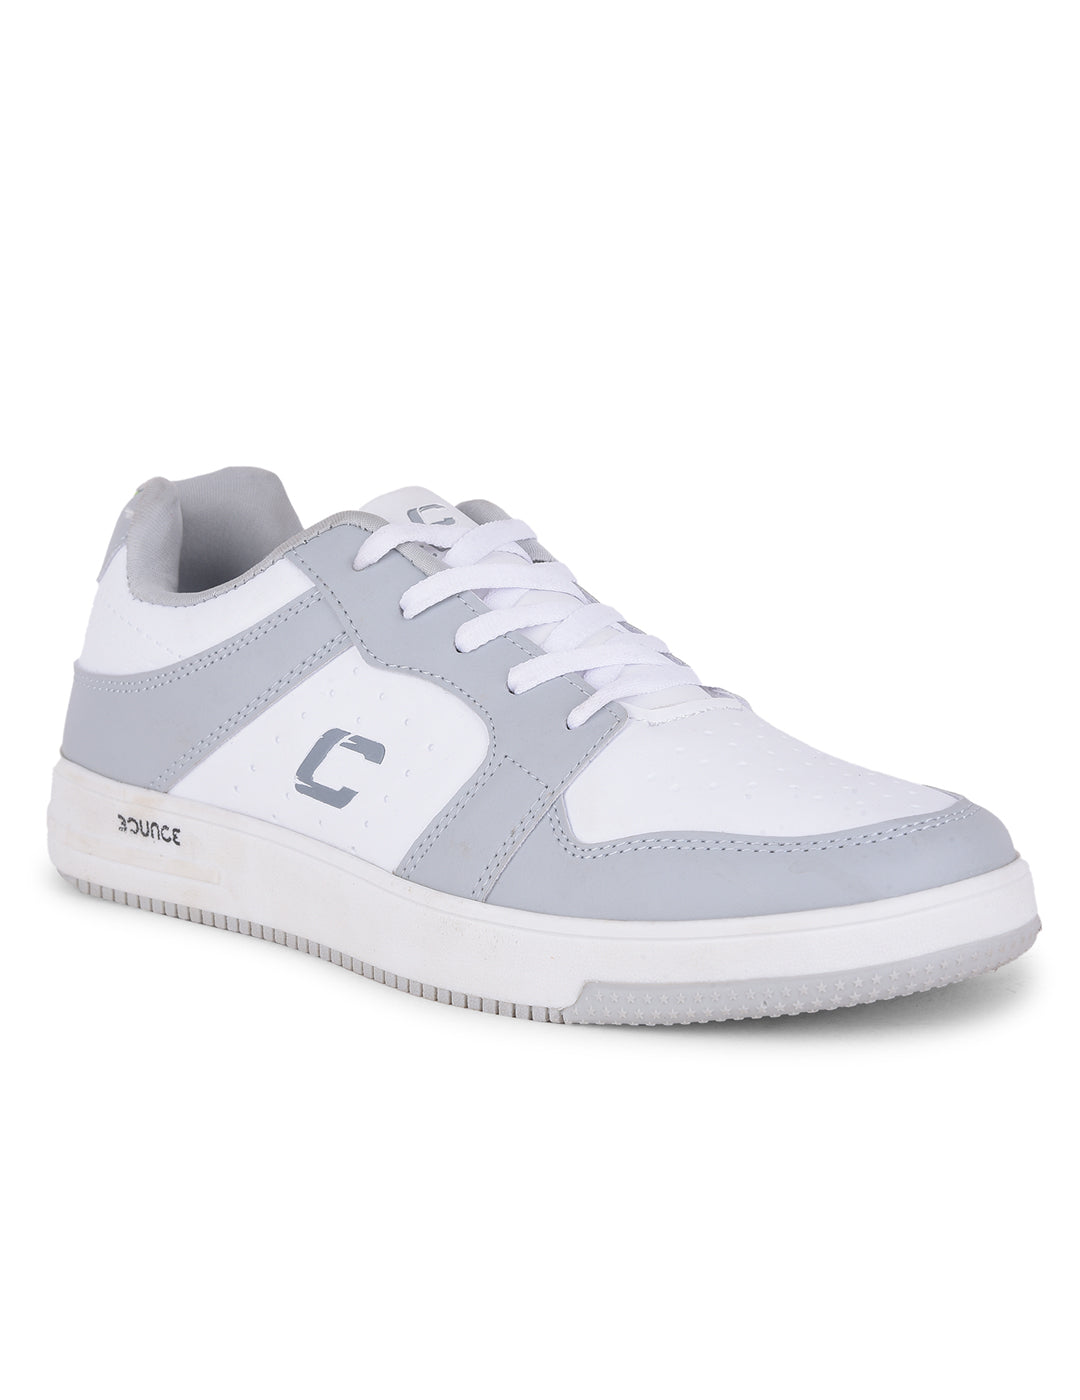 cobb bounce gray white casual shoes